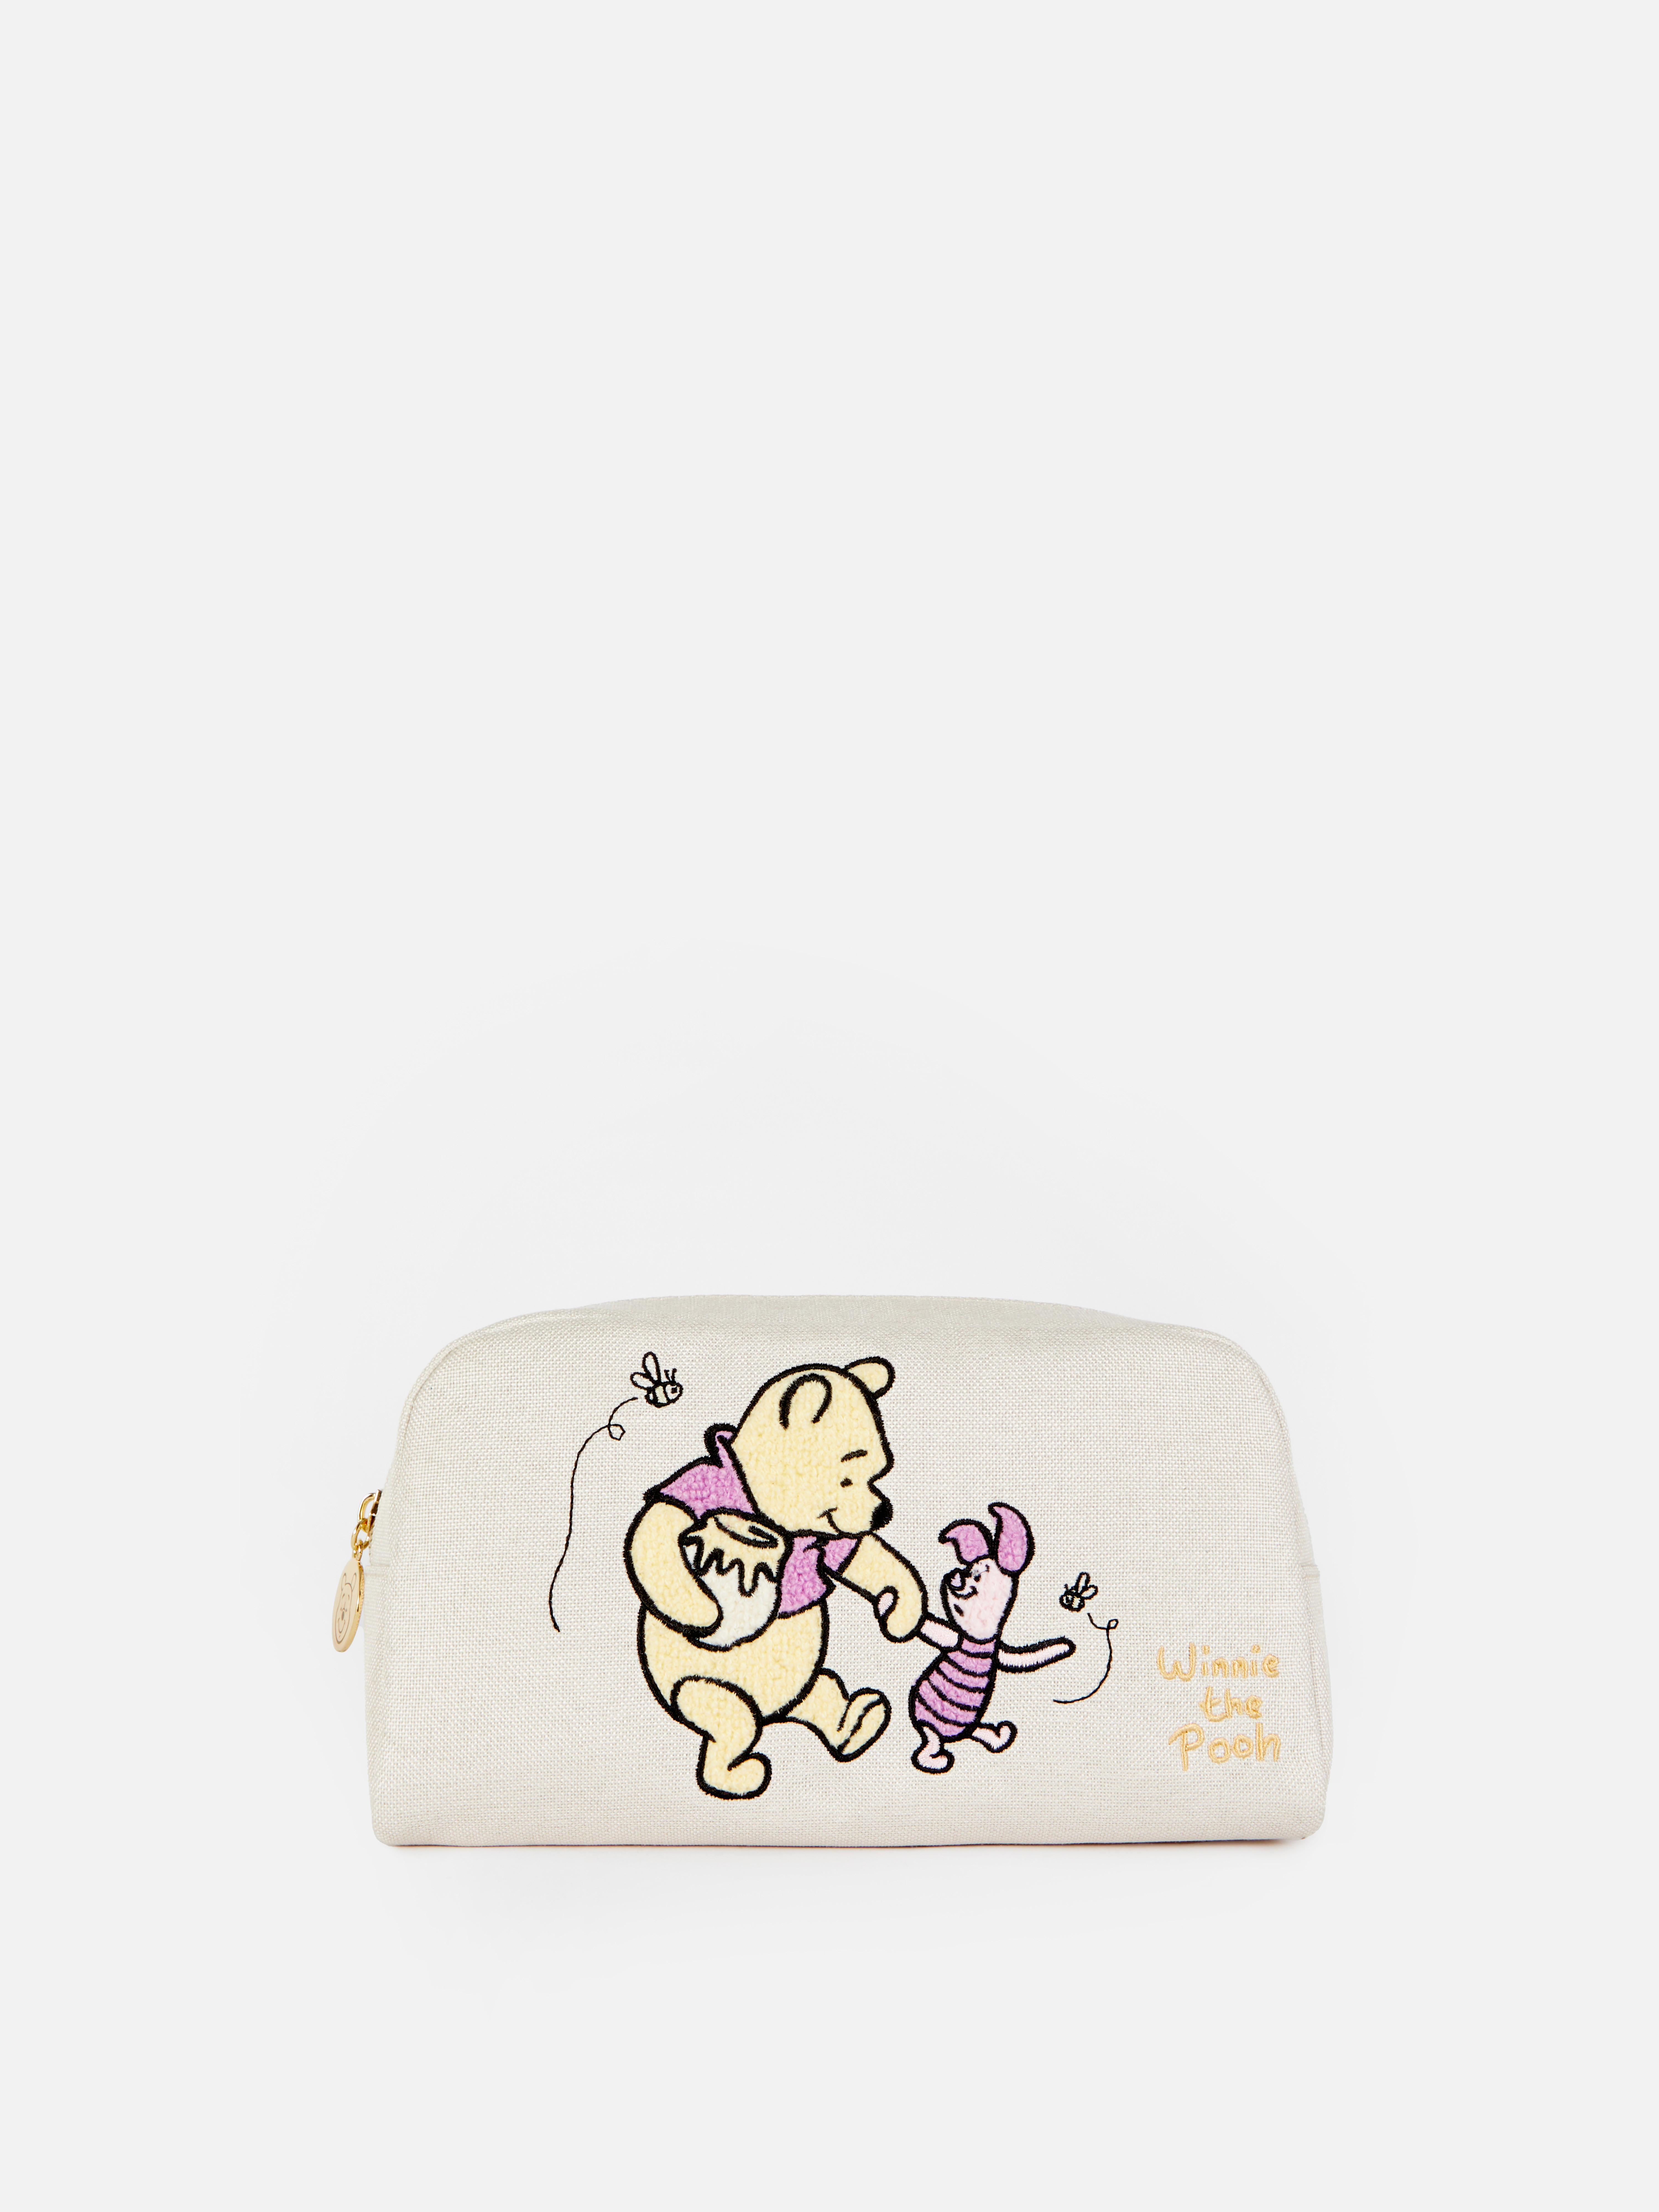 Disney’s Winnie the Pooh Embroidered Makeup Bag